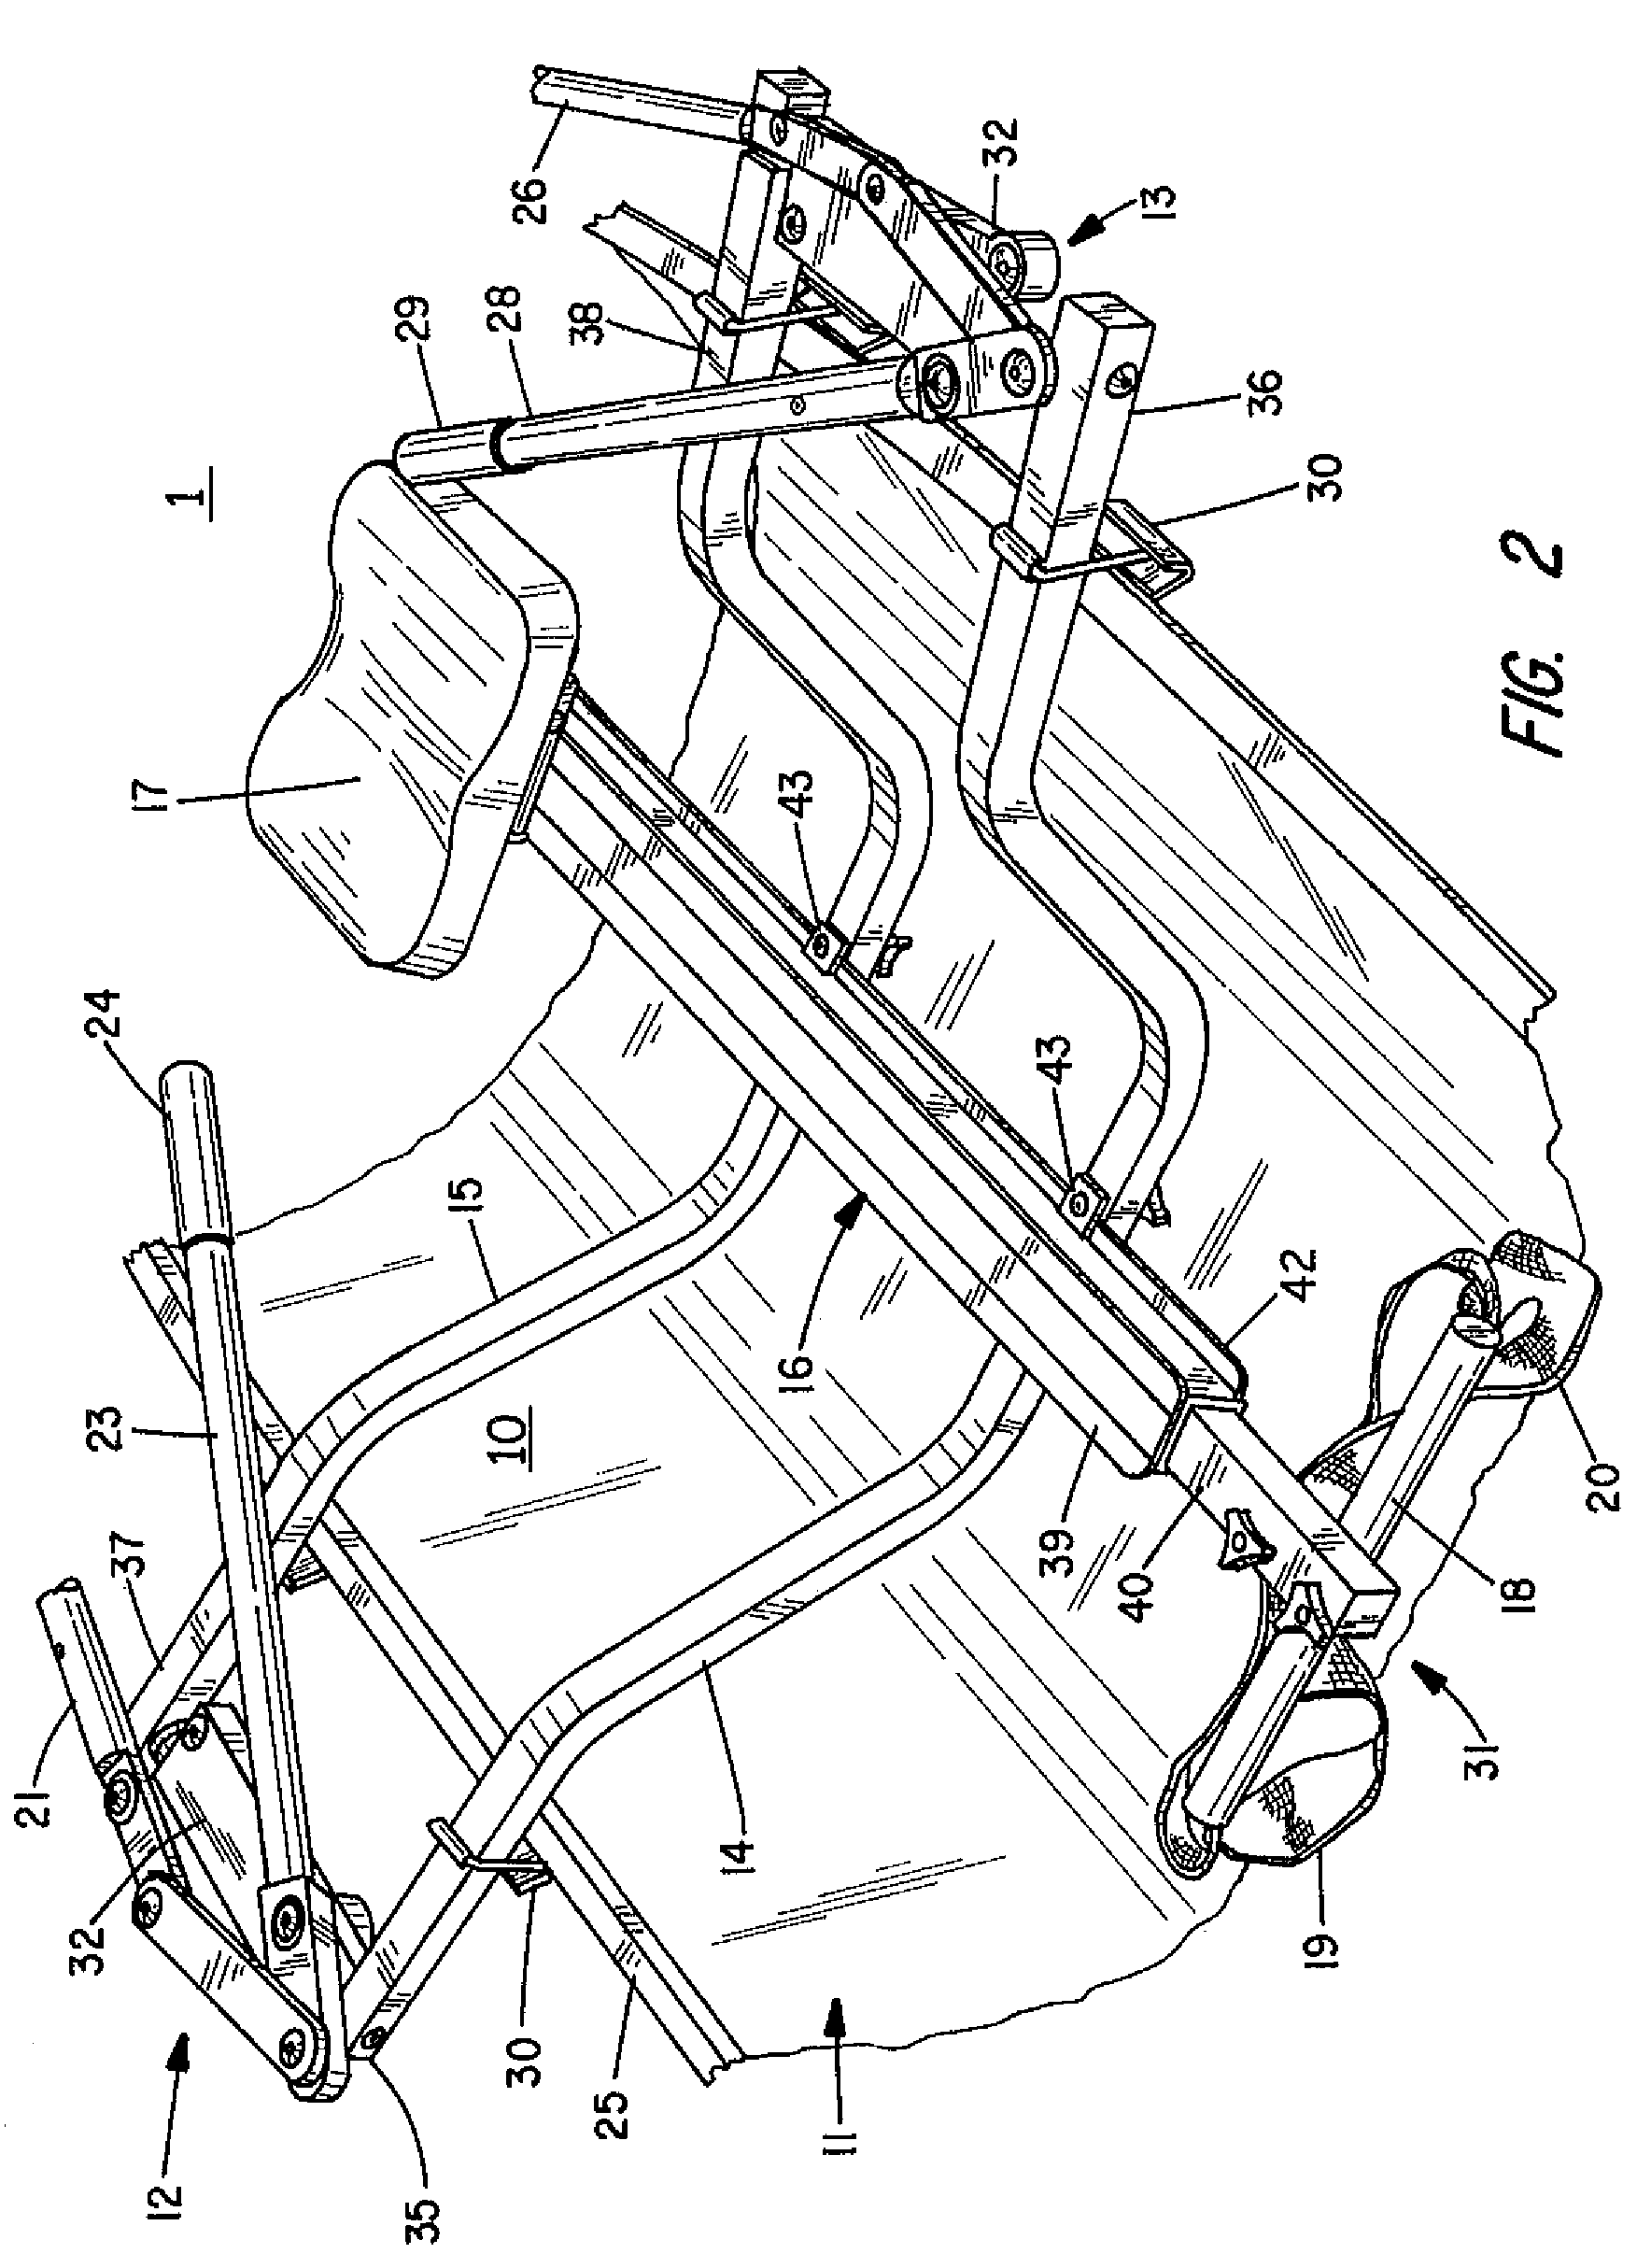 Forward facing rowing attachment with rolling seat